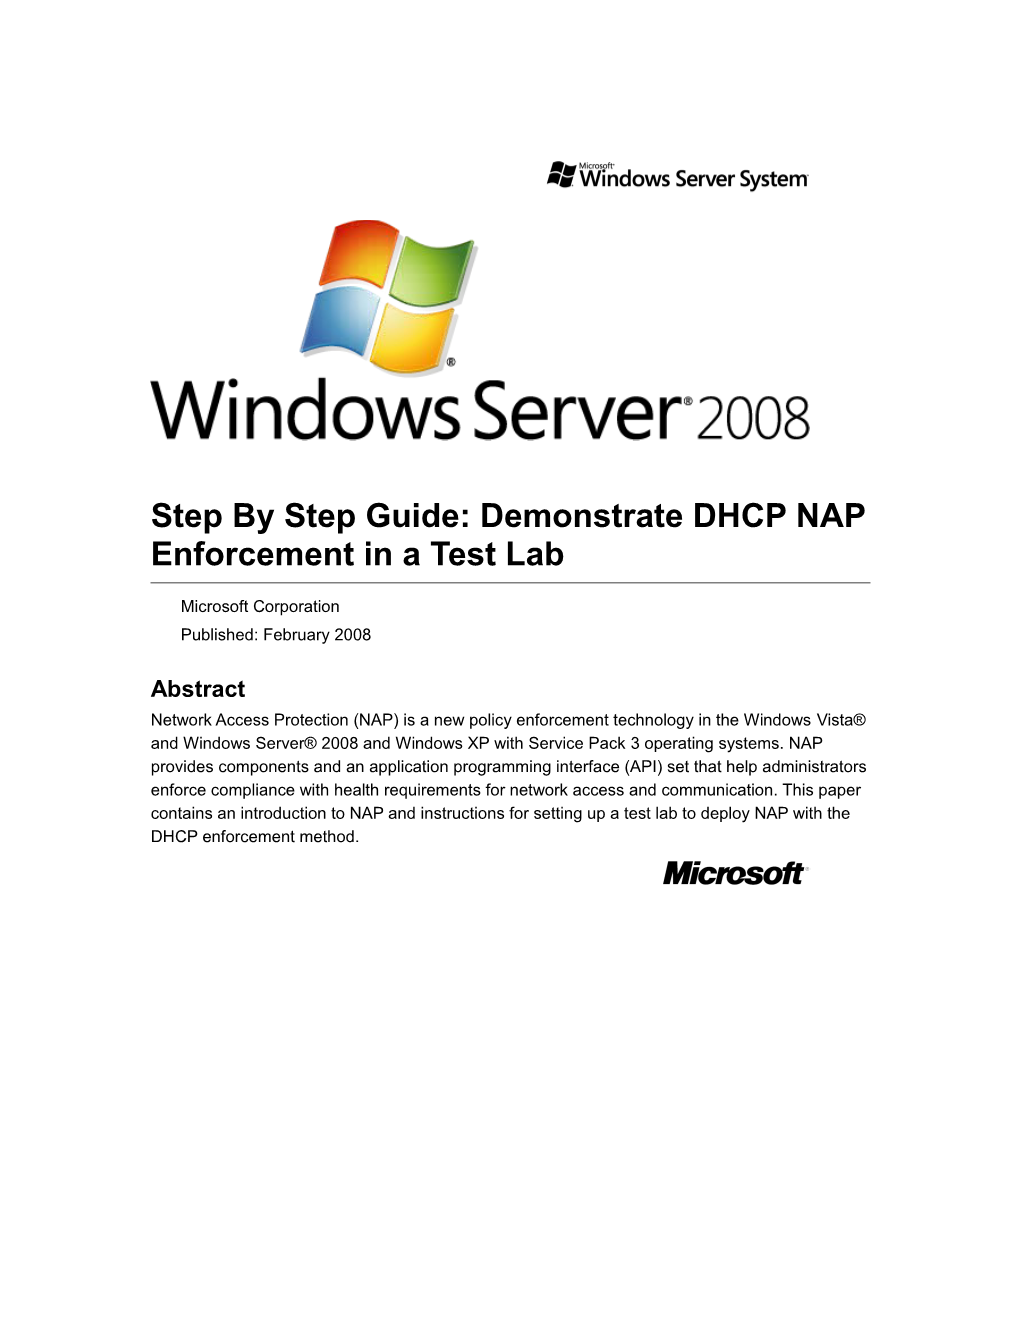 Step by Step Guide: Demonstrate DHCP NAP Enforcement in a Test Lab